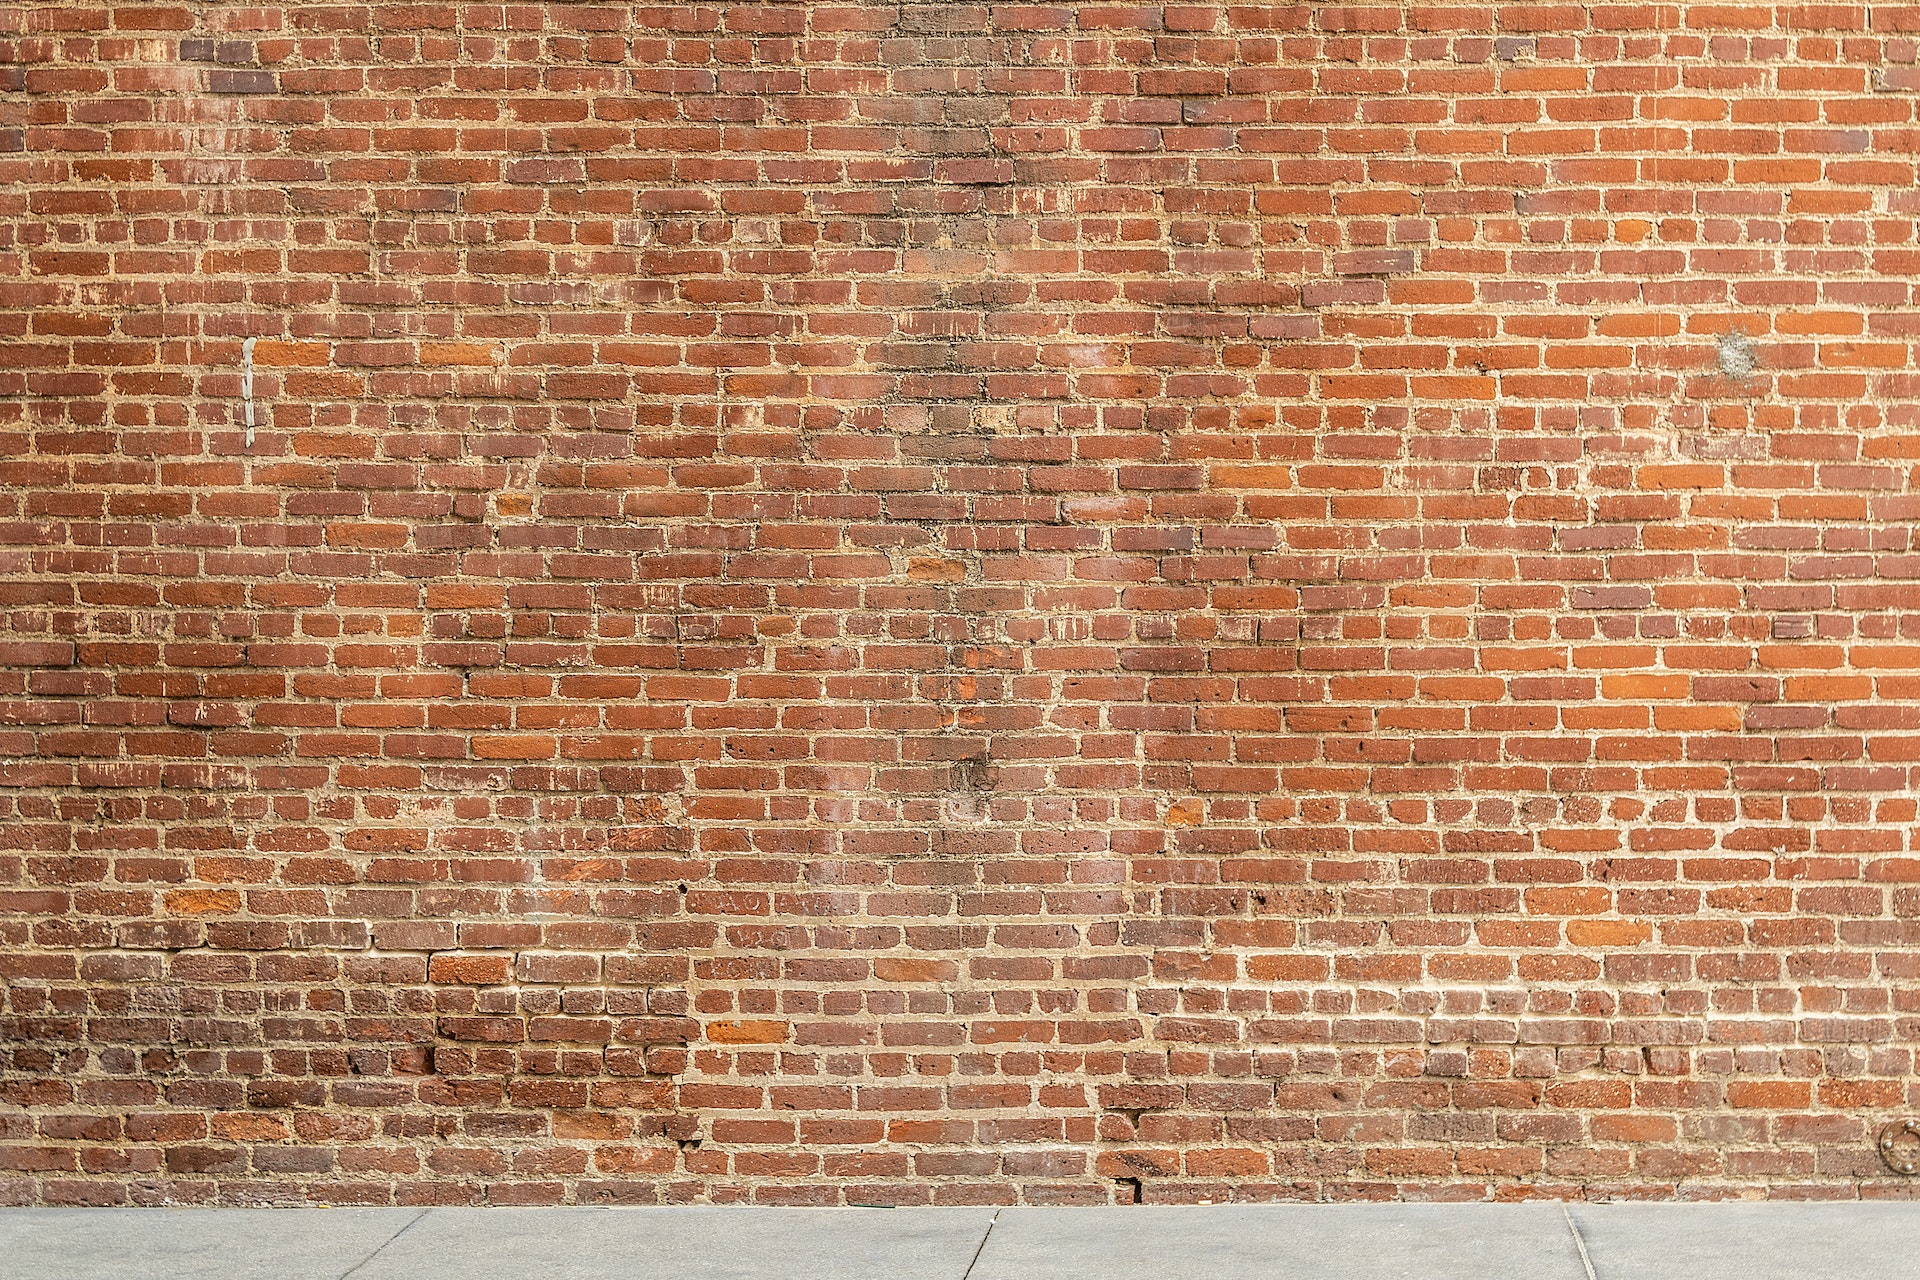 Image of a brick wall with spalling bricks